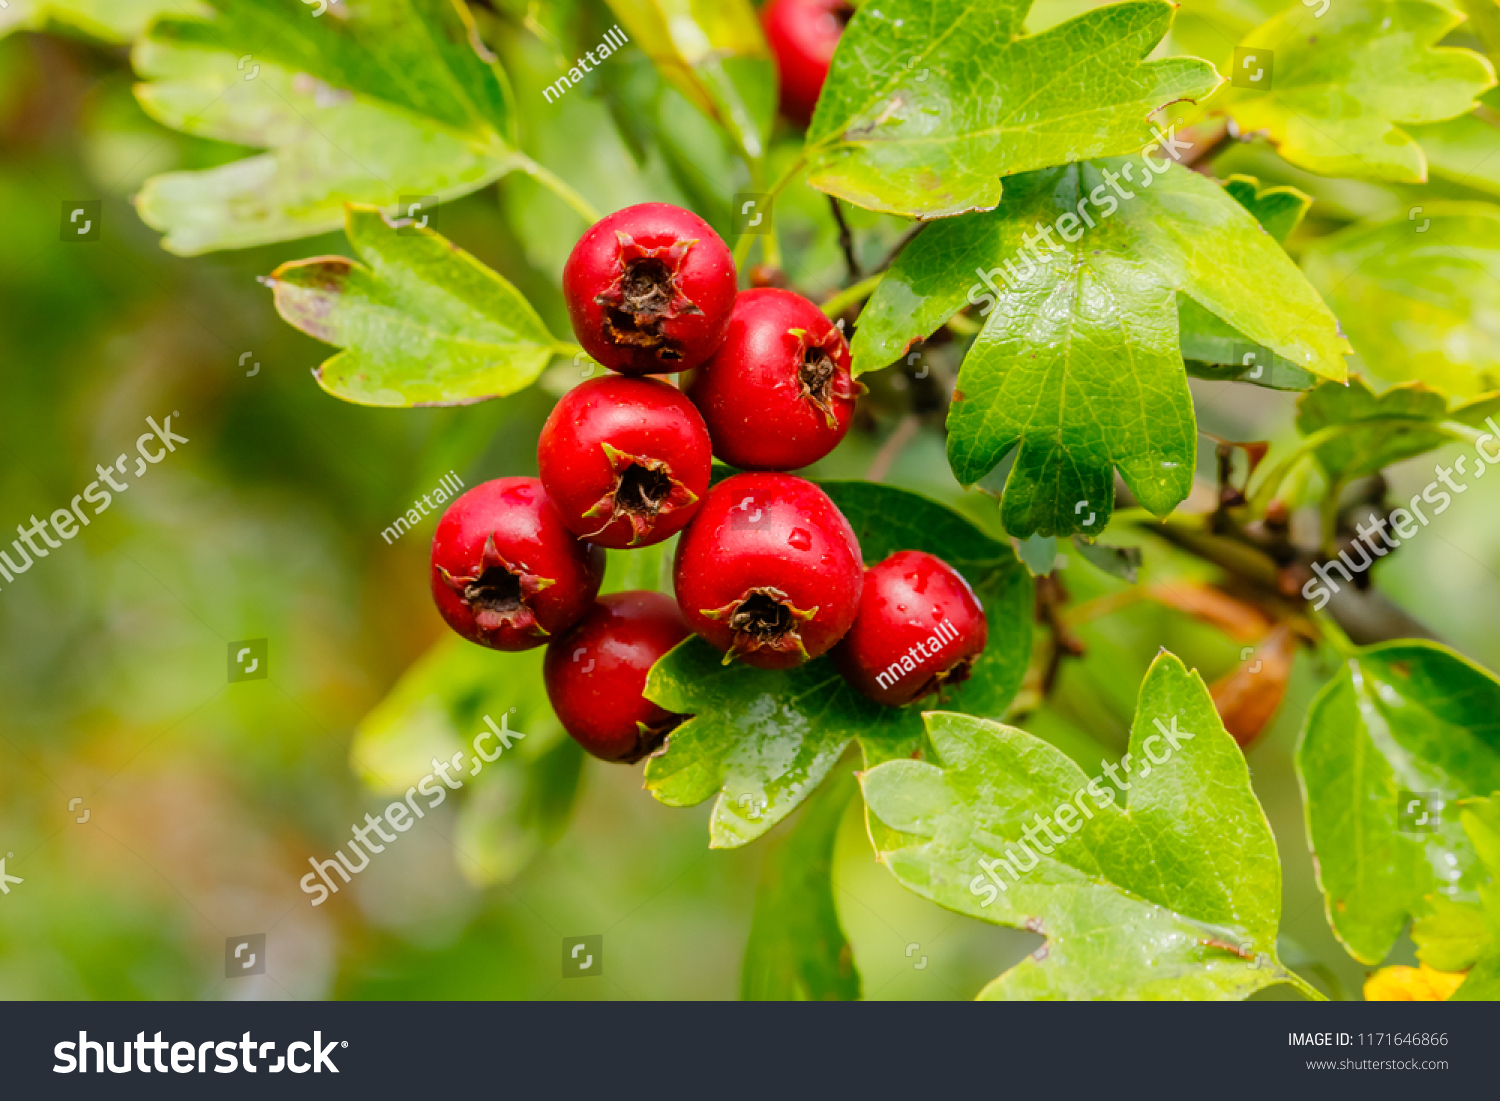 Red fruit of Crataegus monogyna, known as  hawthorn or single-seeded hawthorn ( may, mayblossom, maythorn, quickthorn, whitethorn, motherdie, haw ) #1171646866